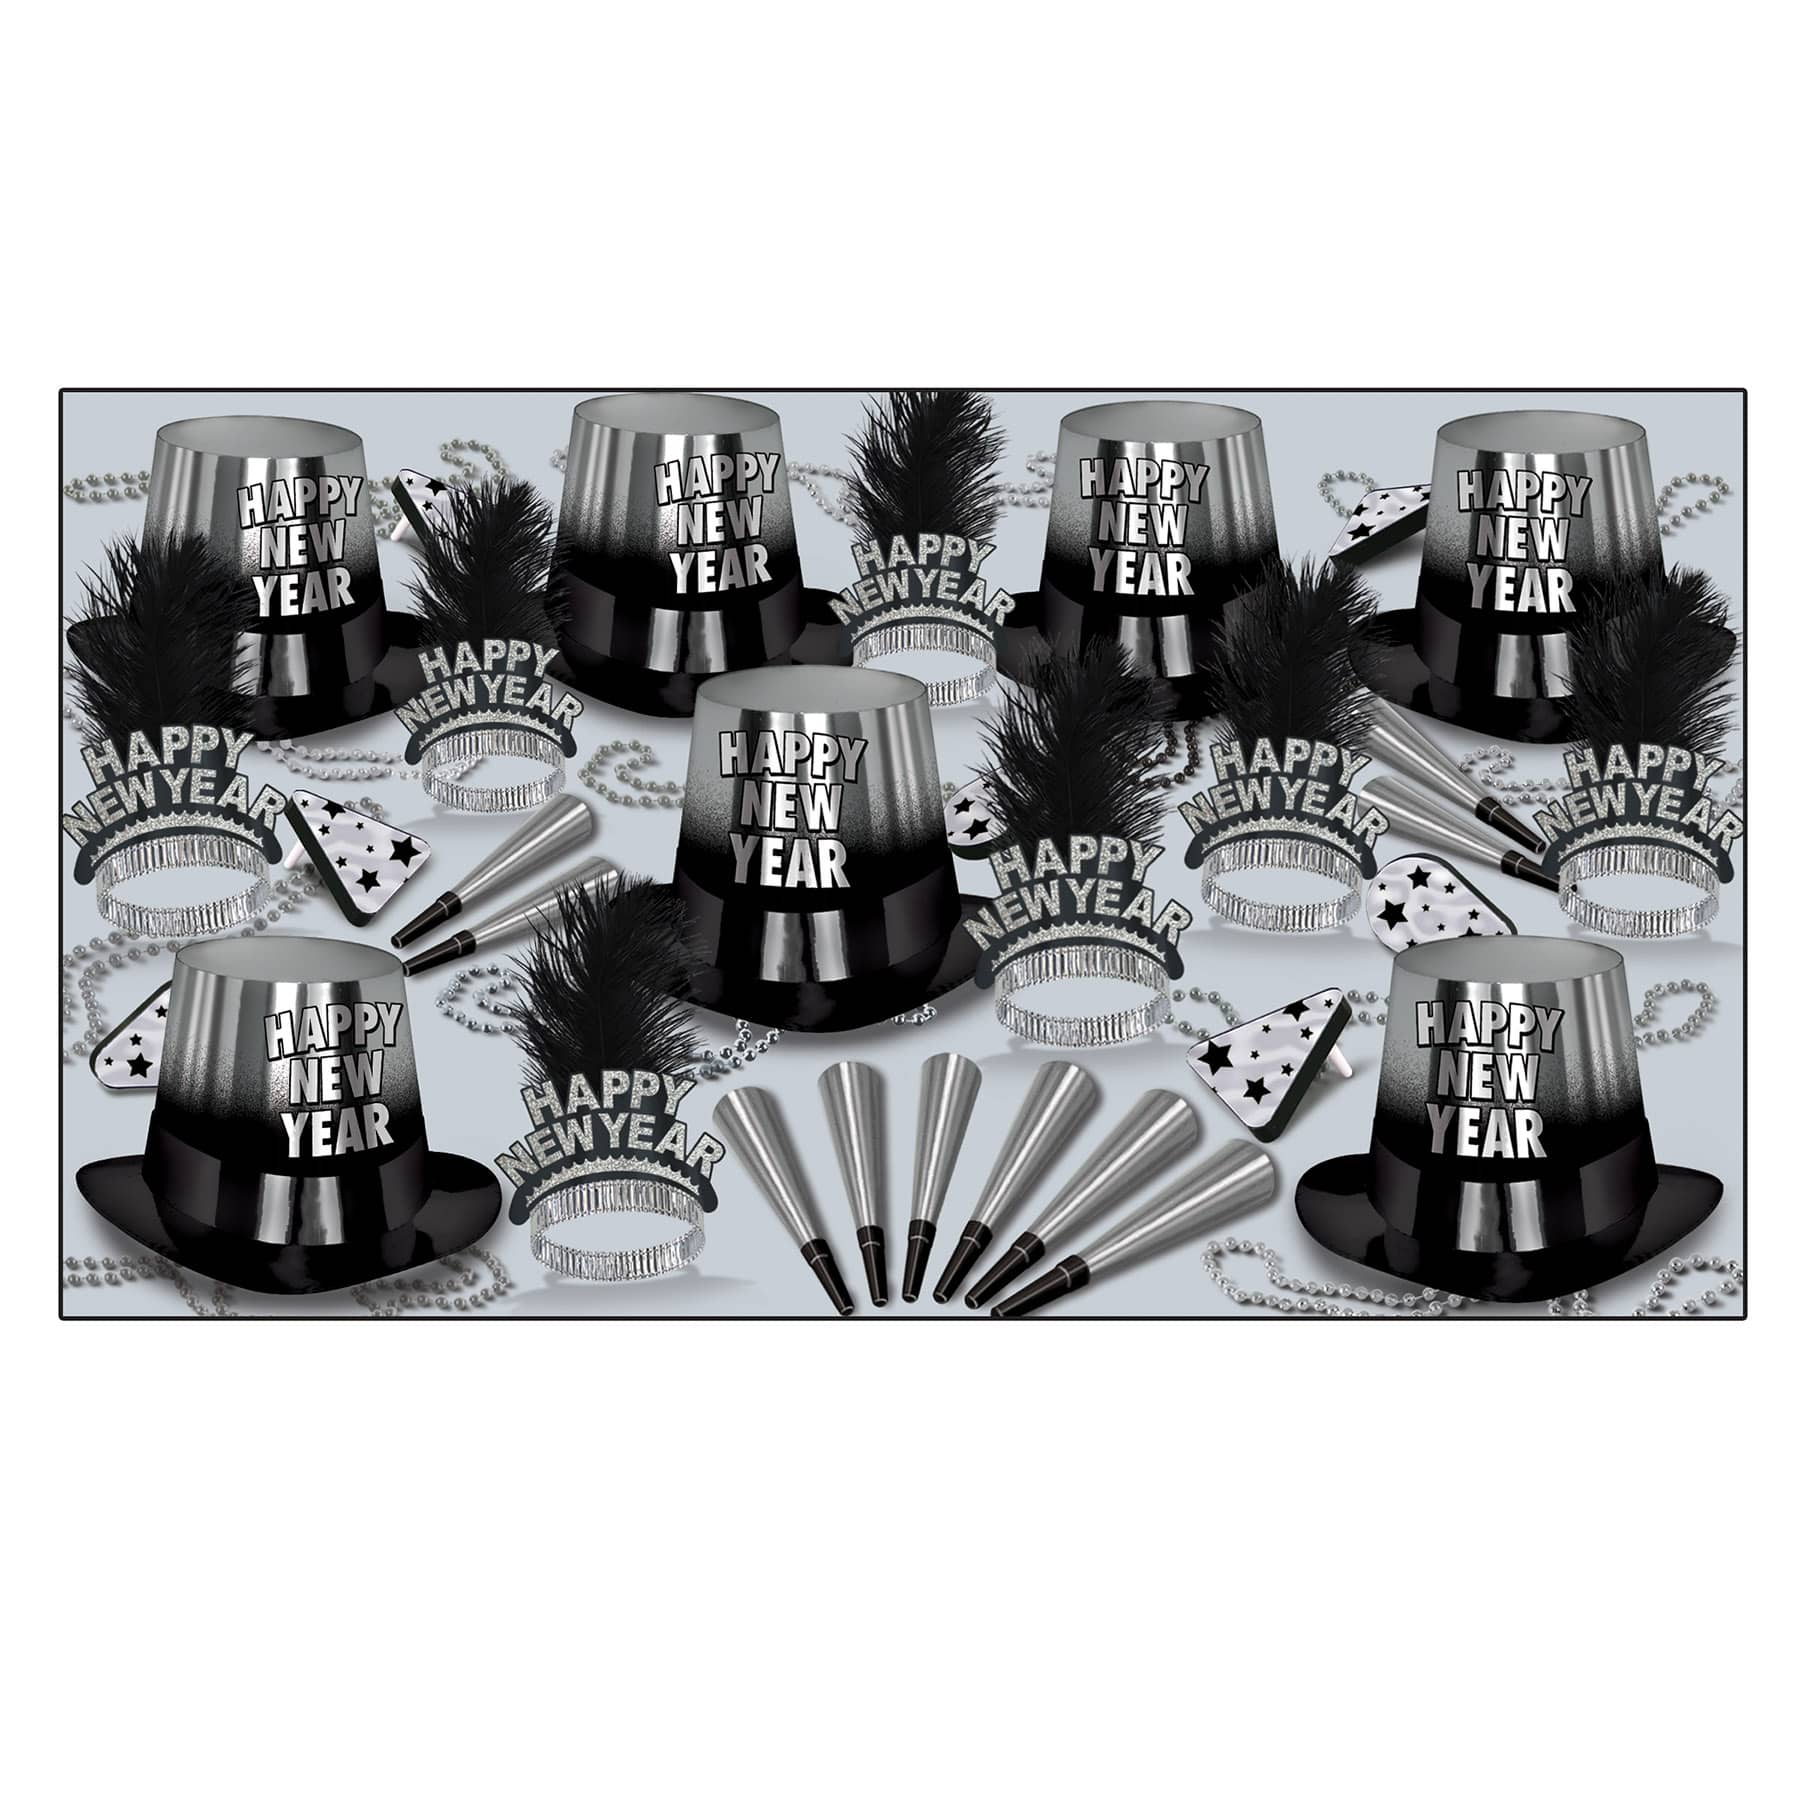 black and silver NYE party kit with happy new year hats, tiaras, silver beads, and horns